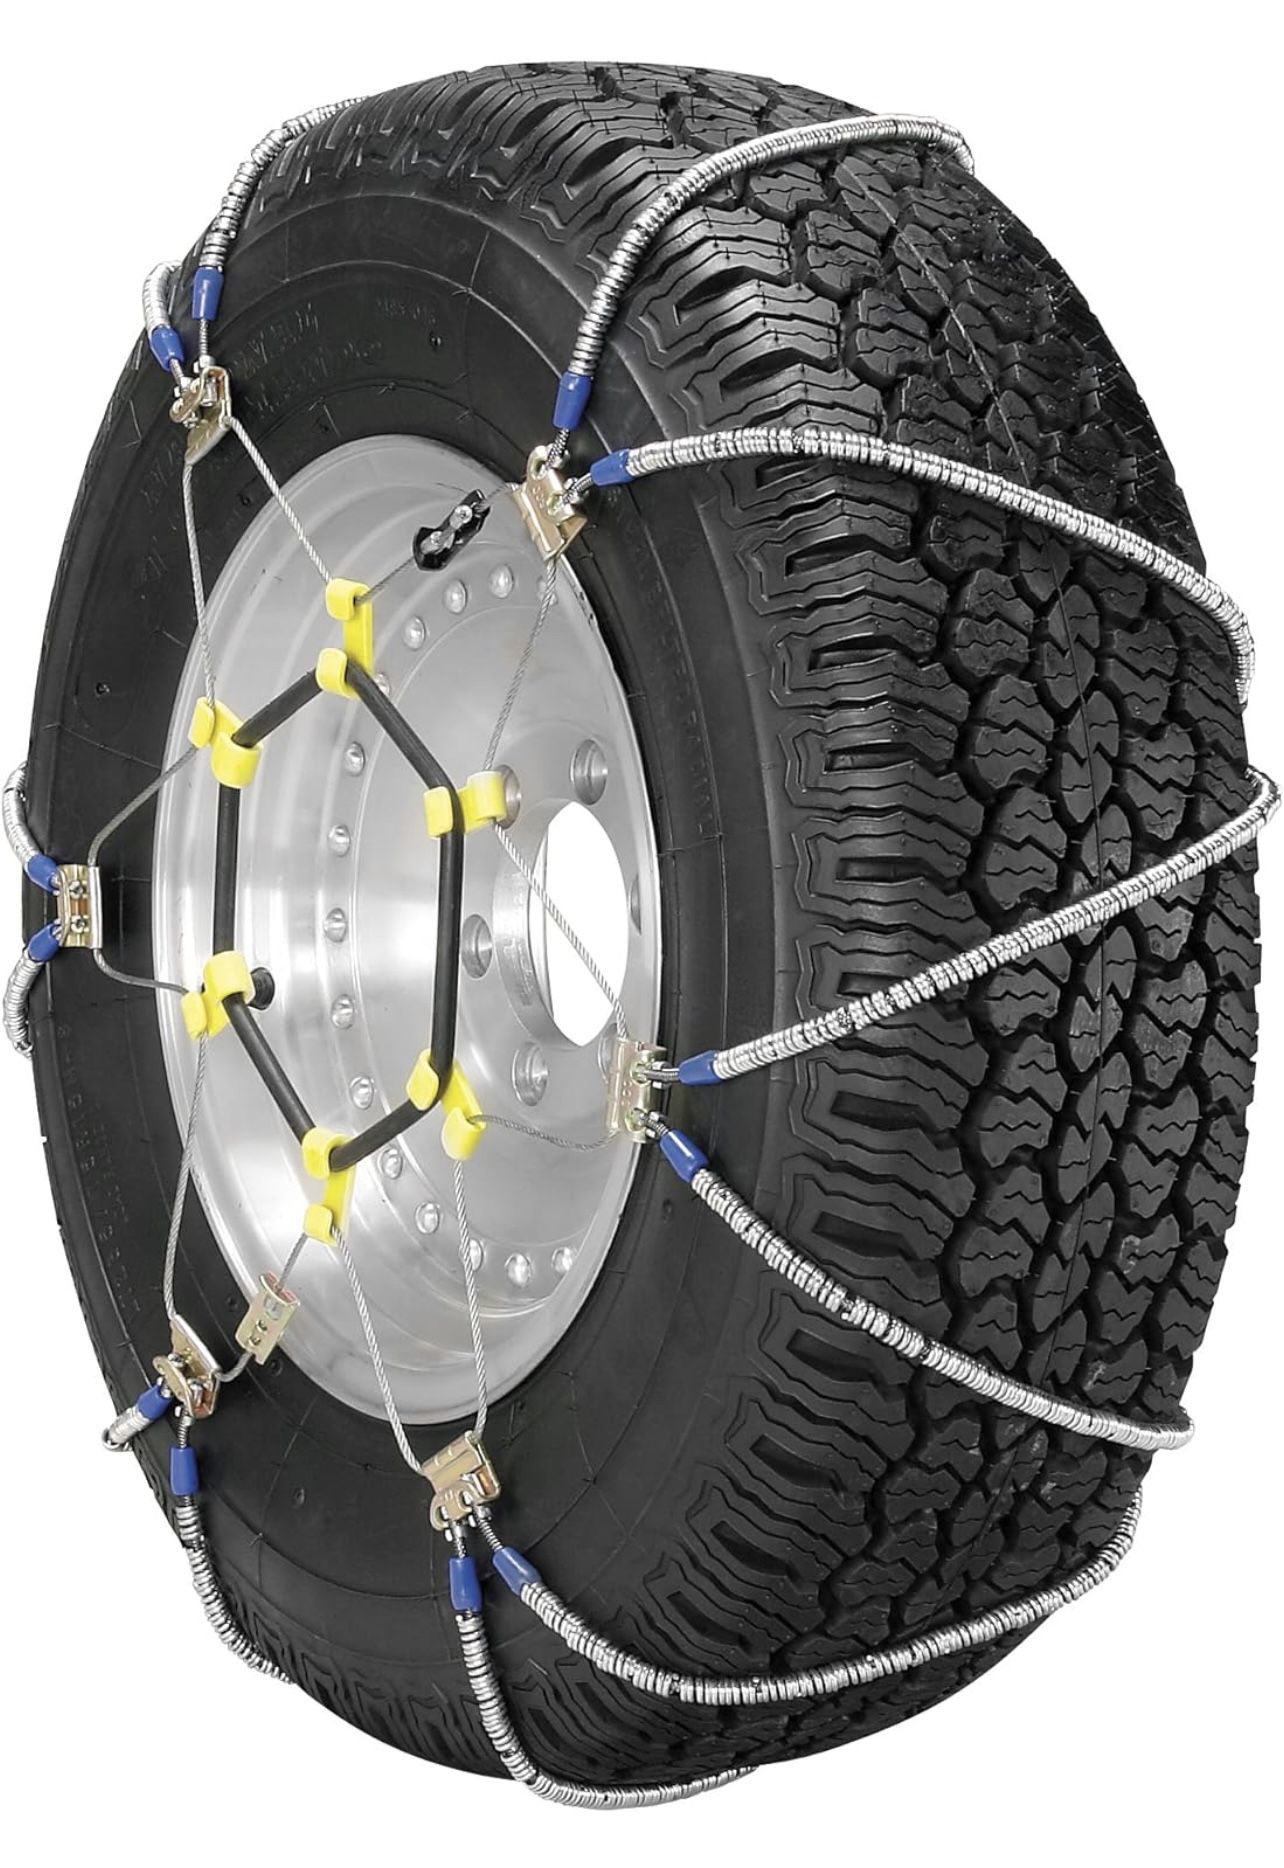 SCC ZT751 Super Z LT Light Truck and SUV Tire Traction Chain - Set of 2